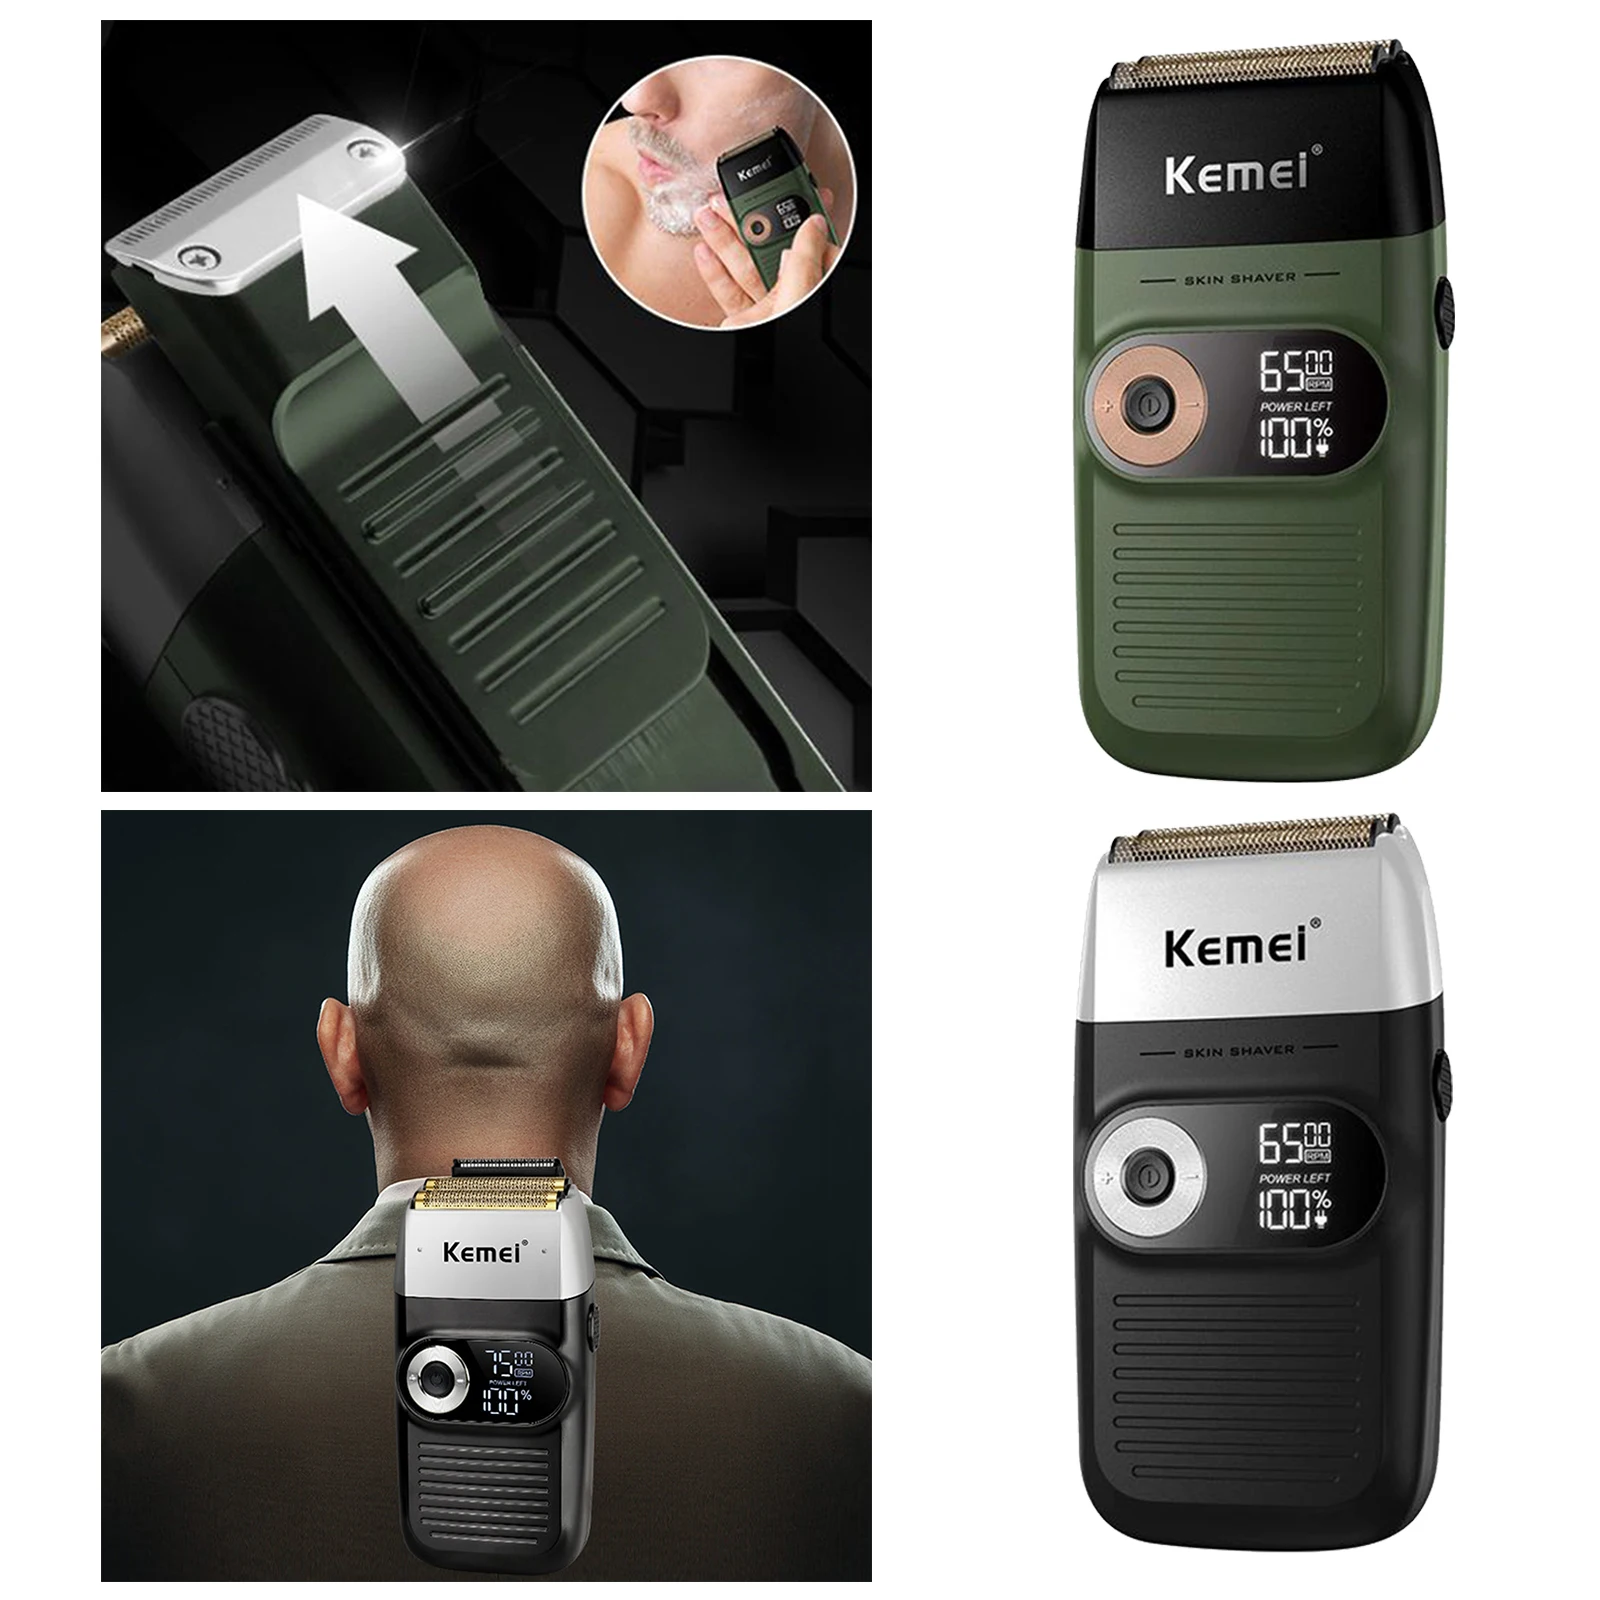 KM-2026 Electric Shaver USB Rechargeable Beard Trimmer Shaving Machine Reciprocating Razor, LED Display, Low noise